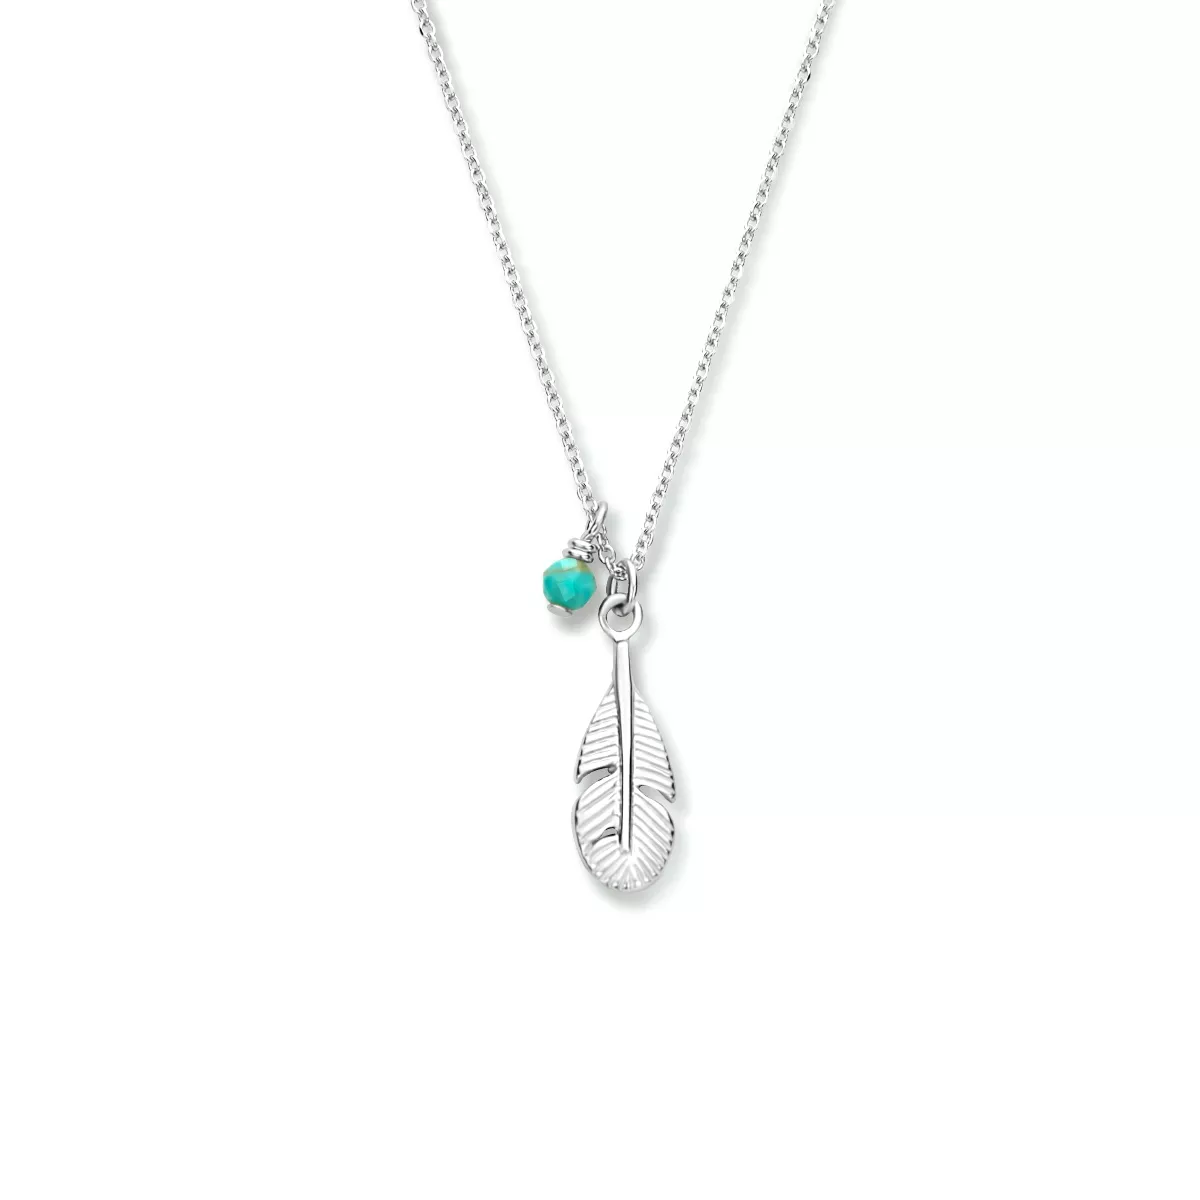 Ketting Veer zilver-synth. steen turquoise 41-45 cm